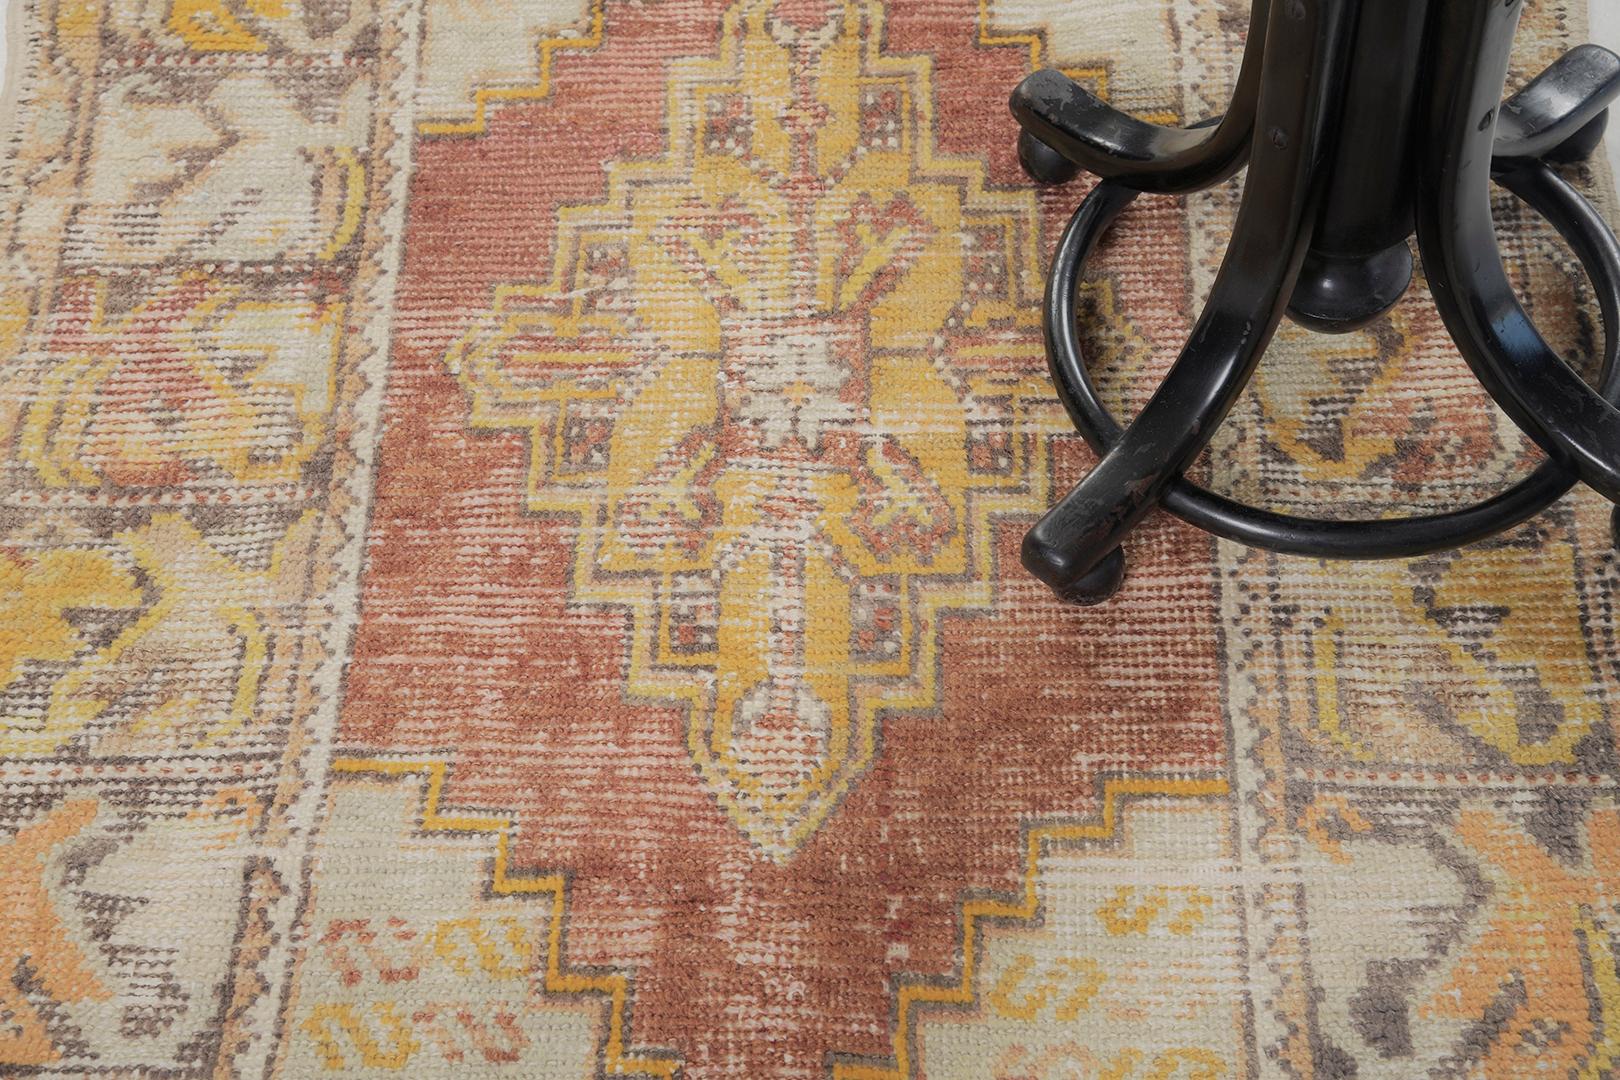 Maden is a stunning pile of woven wool that can transform your room into traditional and ethnic interiors. Knowing their history while turning your home aesthetically gives so many promising interiors of gold and red symbolic elements. Turkish